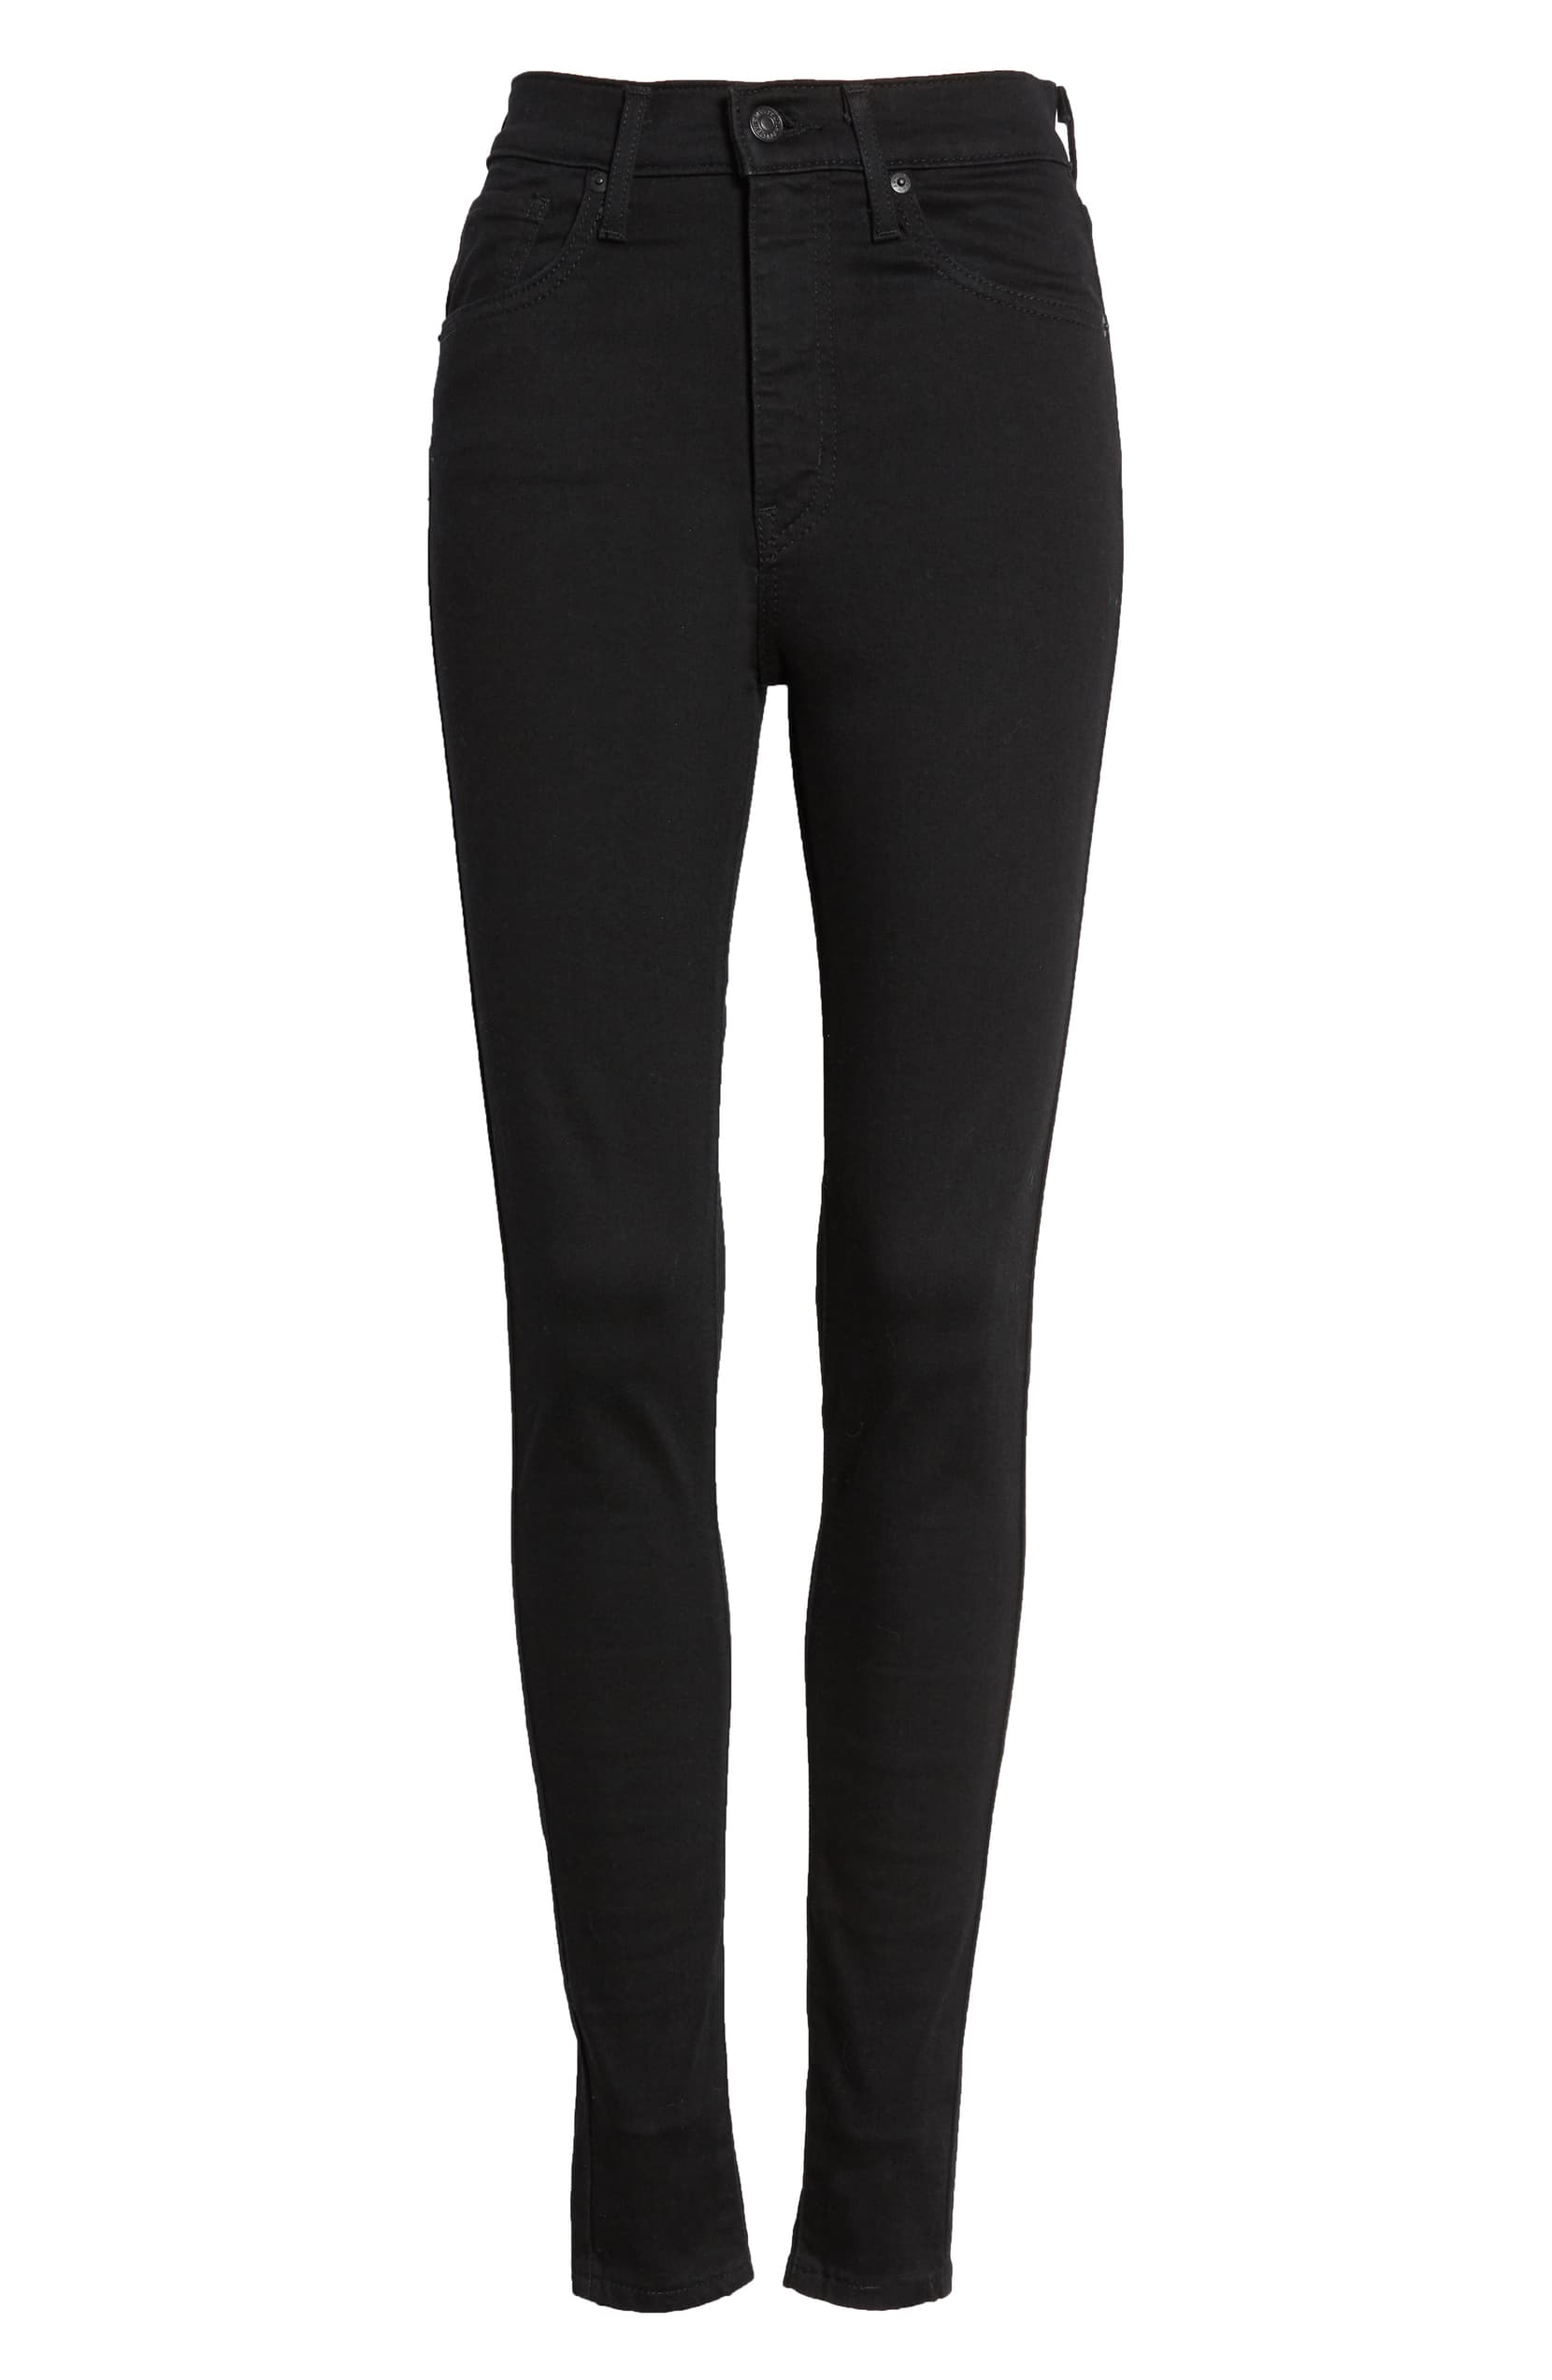 stretchy high waisted black jeans